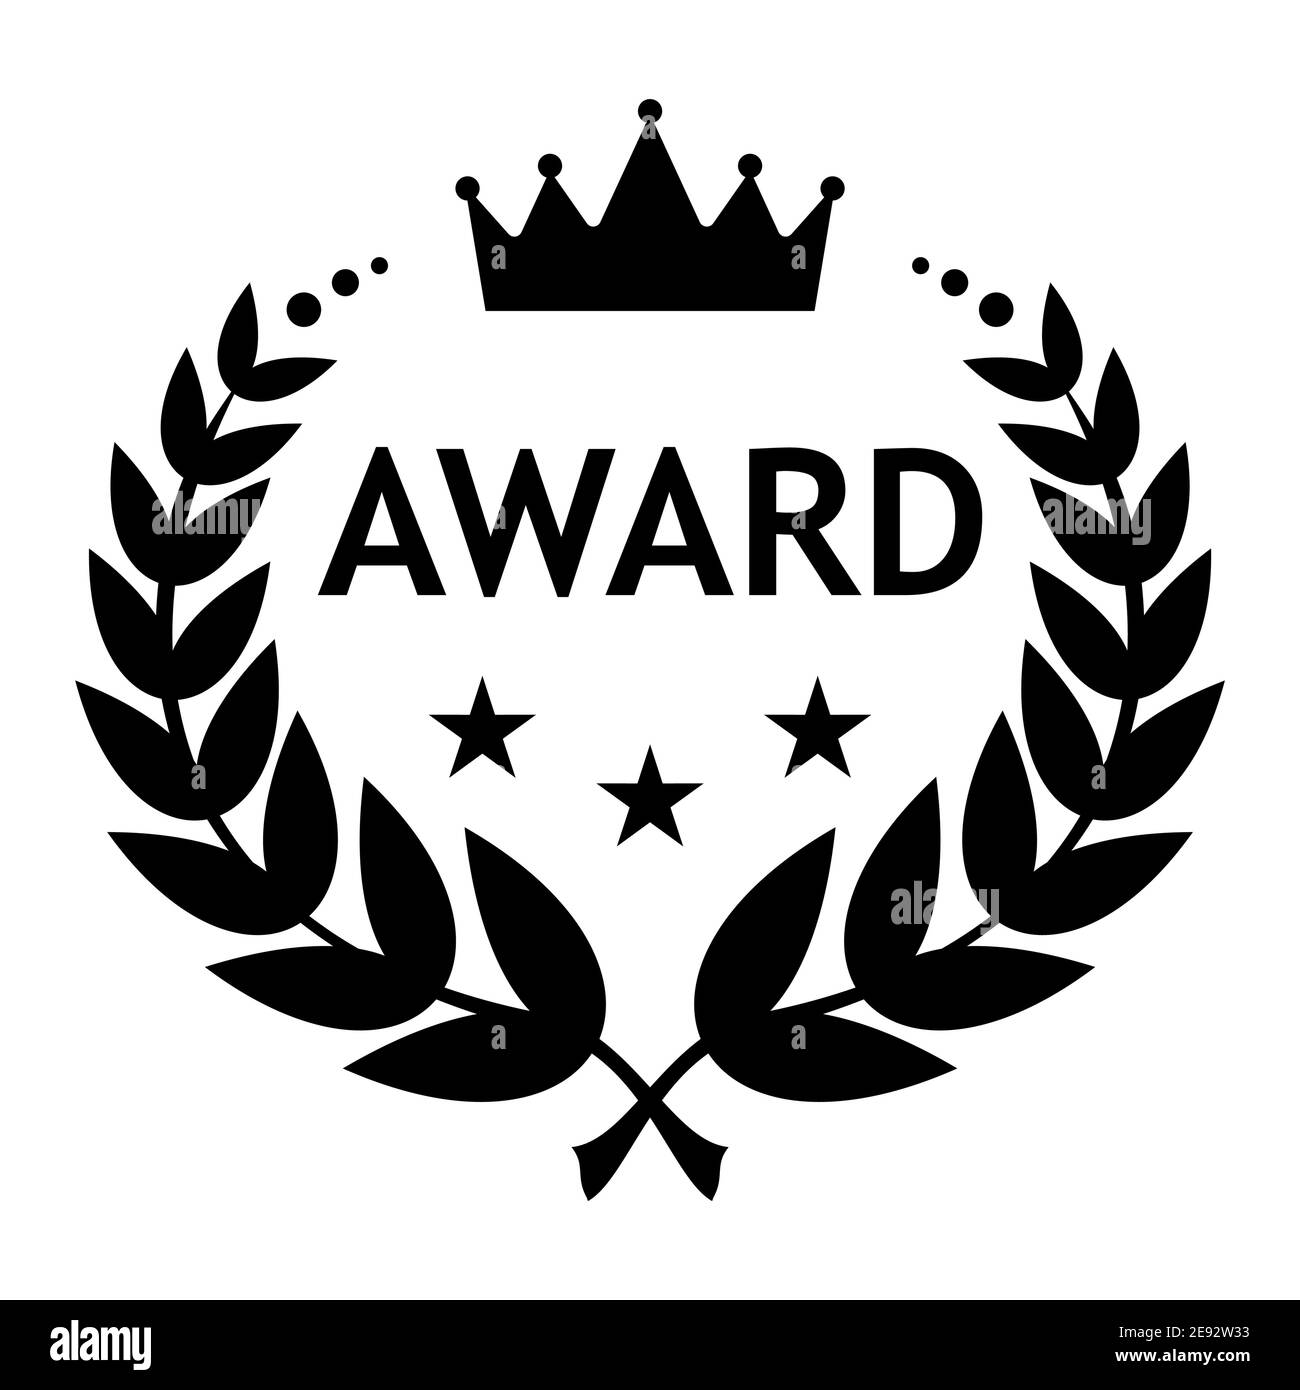 Film Award for the best film in the form of logo with laurel branch. Stock Vector